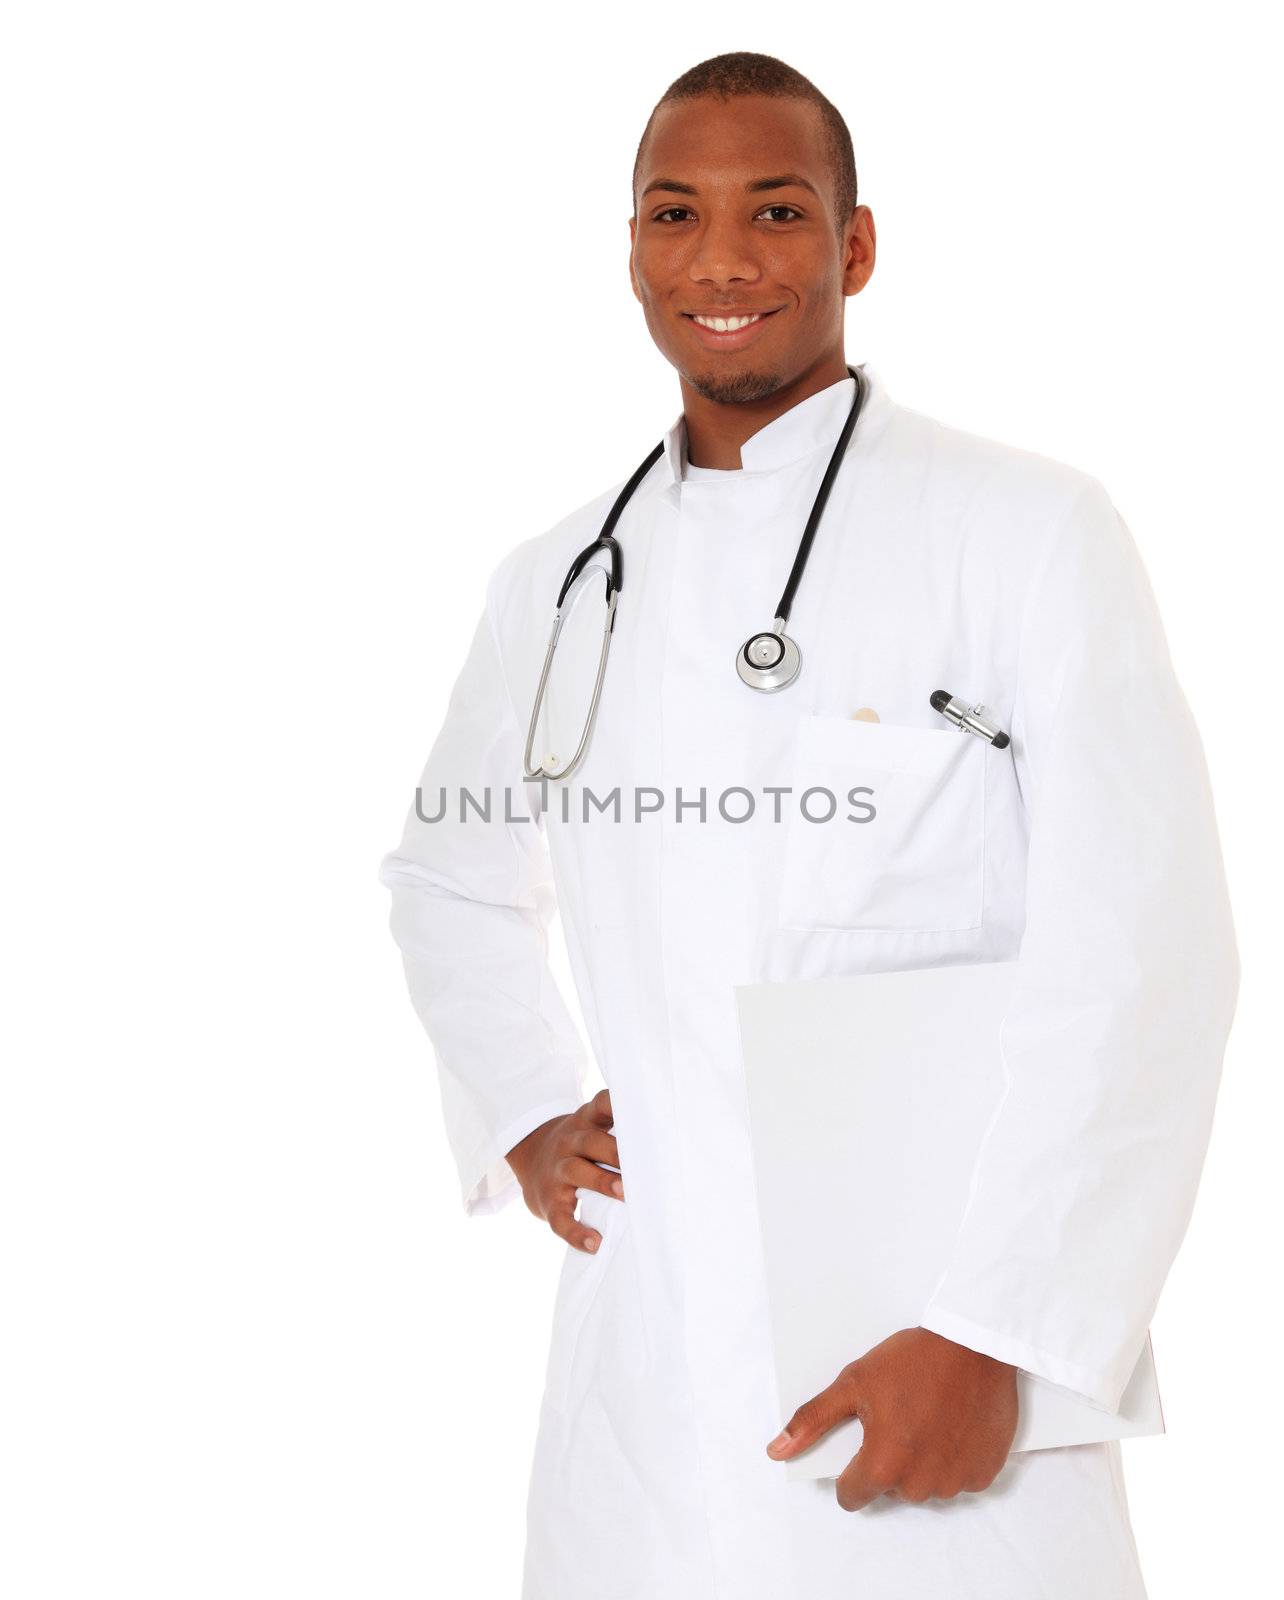 Attractive black doctor. All on white background.